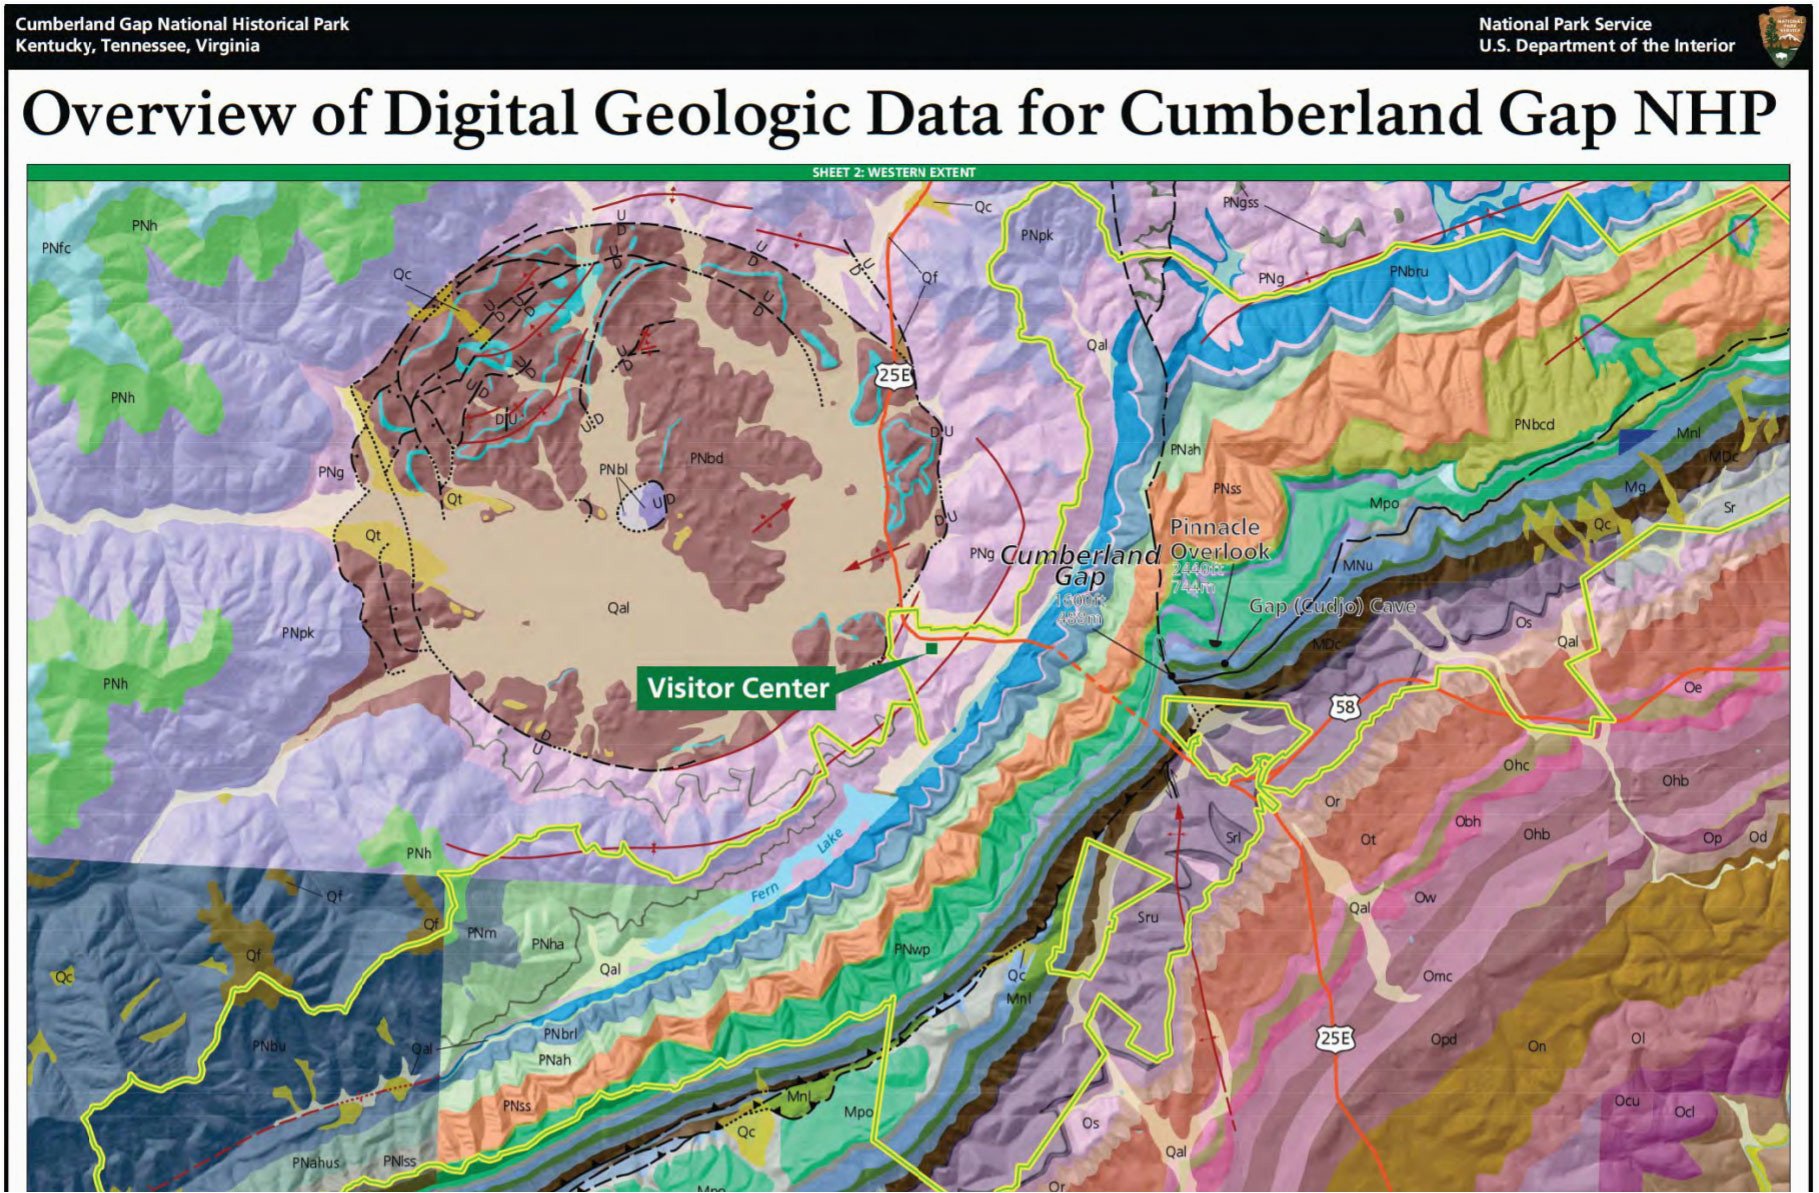 Tennessee State Park Map Nps Geodiversity atlas Cumberland Gap National Historical Park